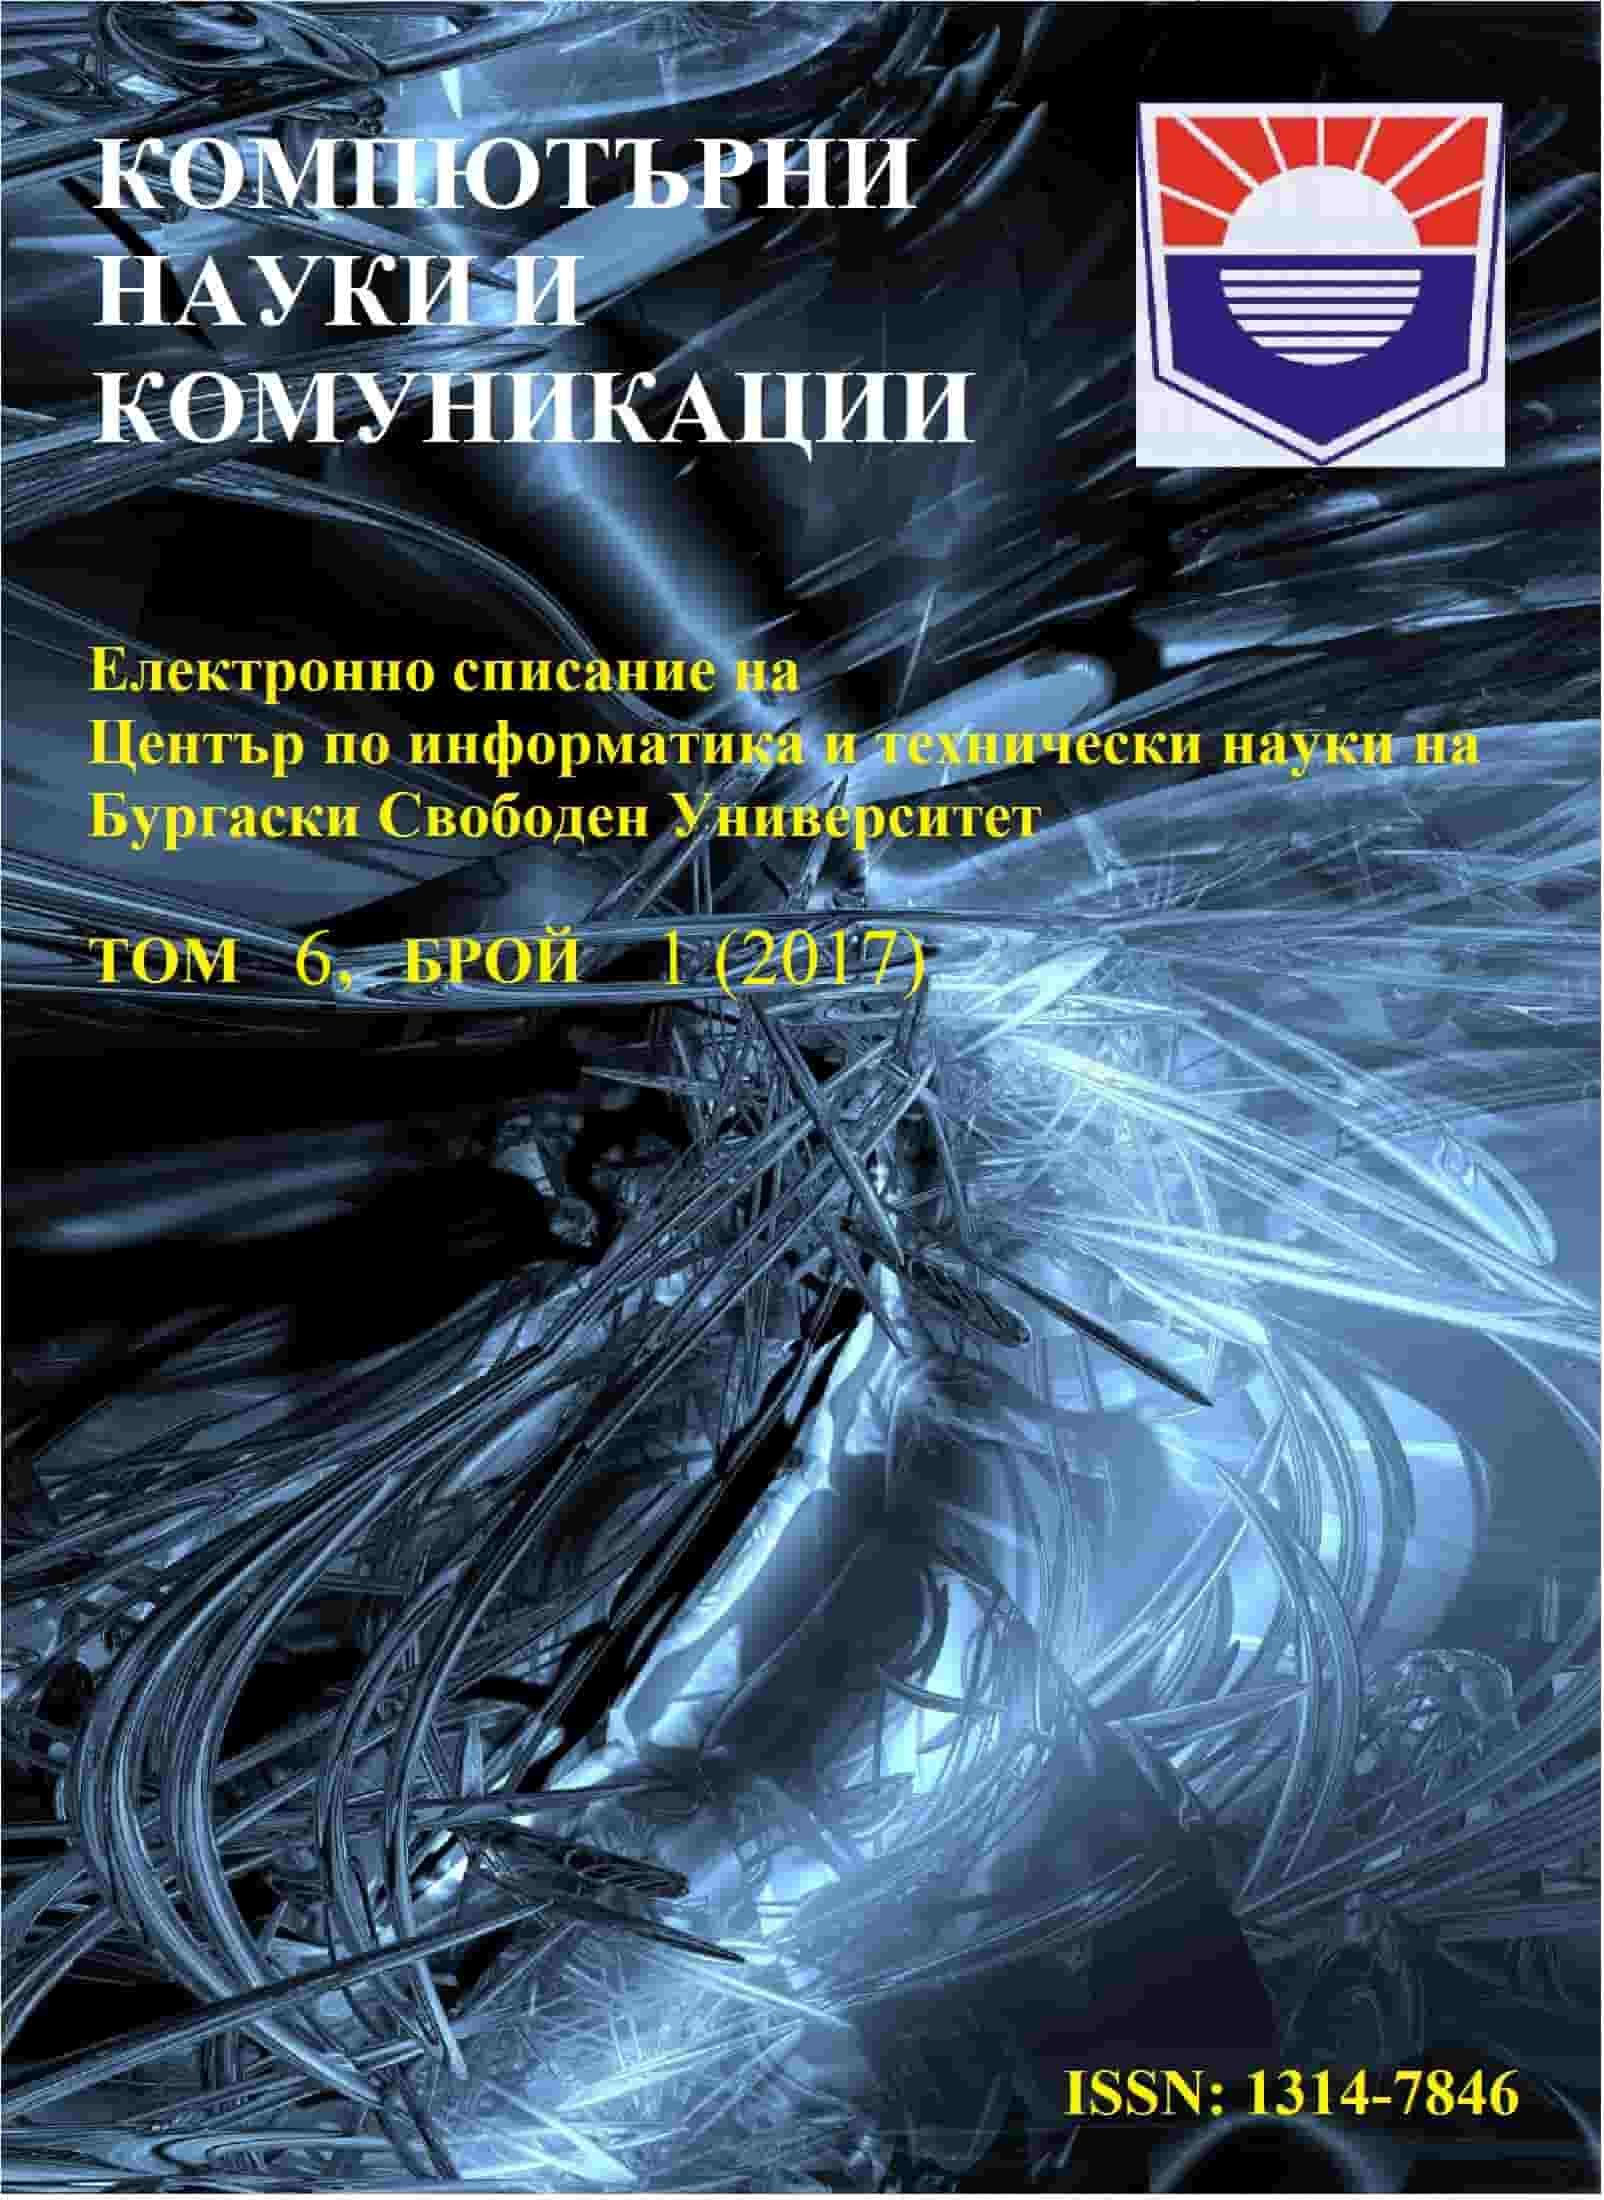 CHALLENGES FOR THE ENTRY OF INFORMATION TECHNOLOGIES IN THE BALKAN UNIVERSITIES CONCEPTUAL ISSUES AND PRACTICAL CHALLENGES Cover Image